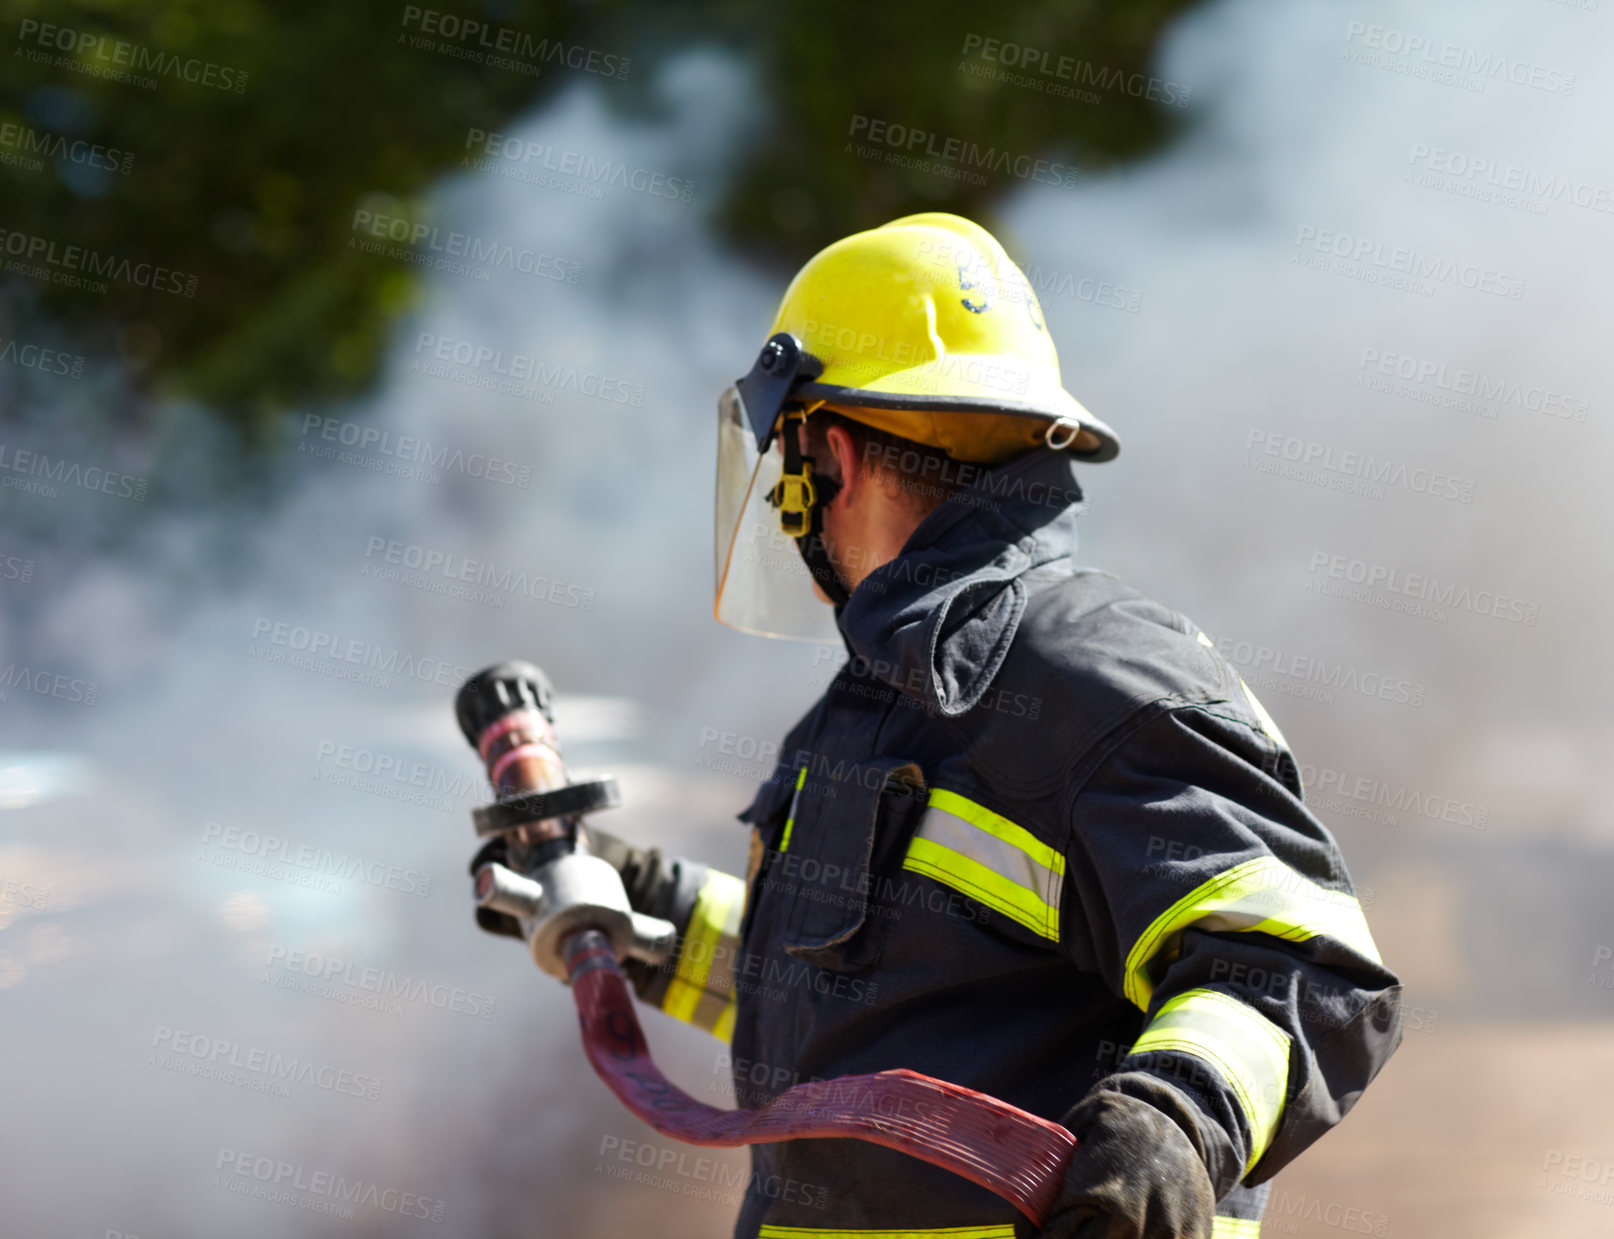 Buy stock photo A caucasian fireman holding a hose and surrounded by the smoke from the fire he's just extinguished